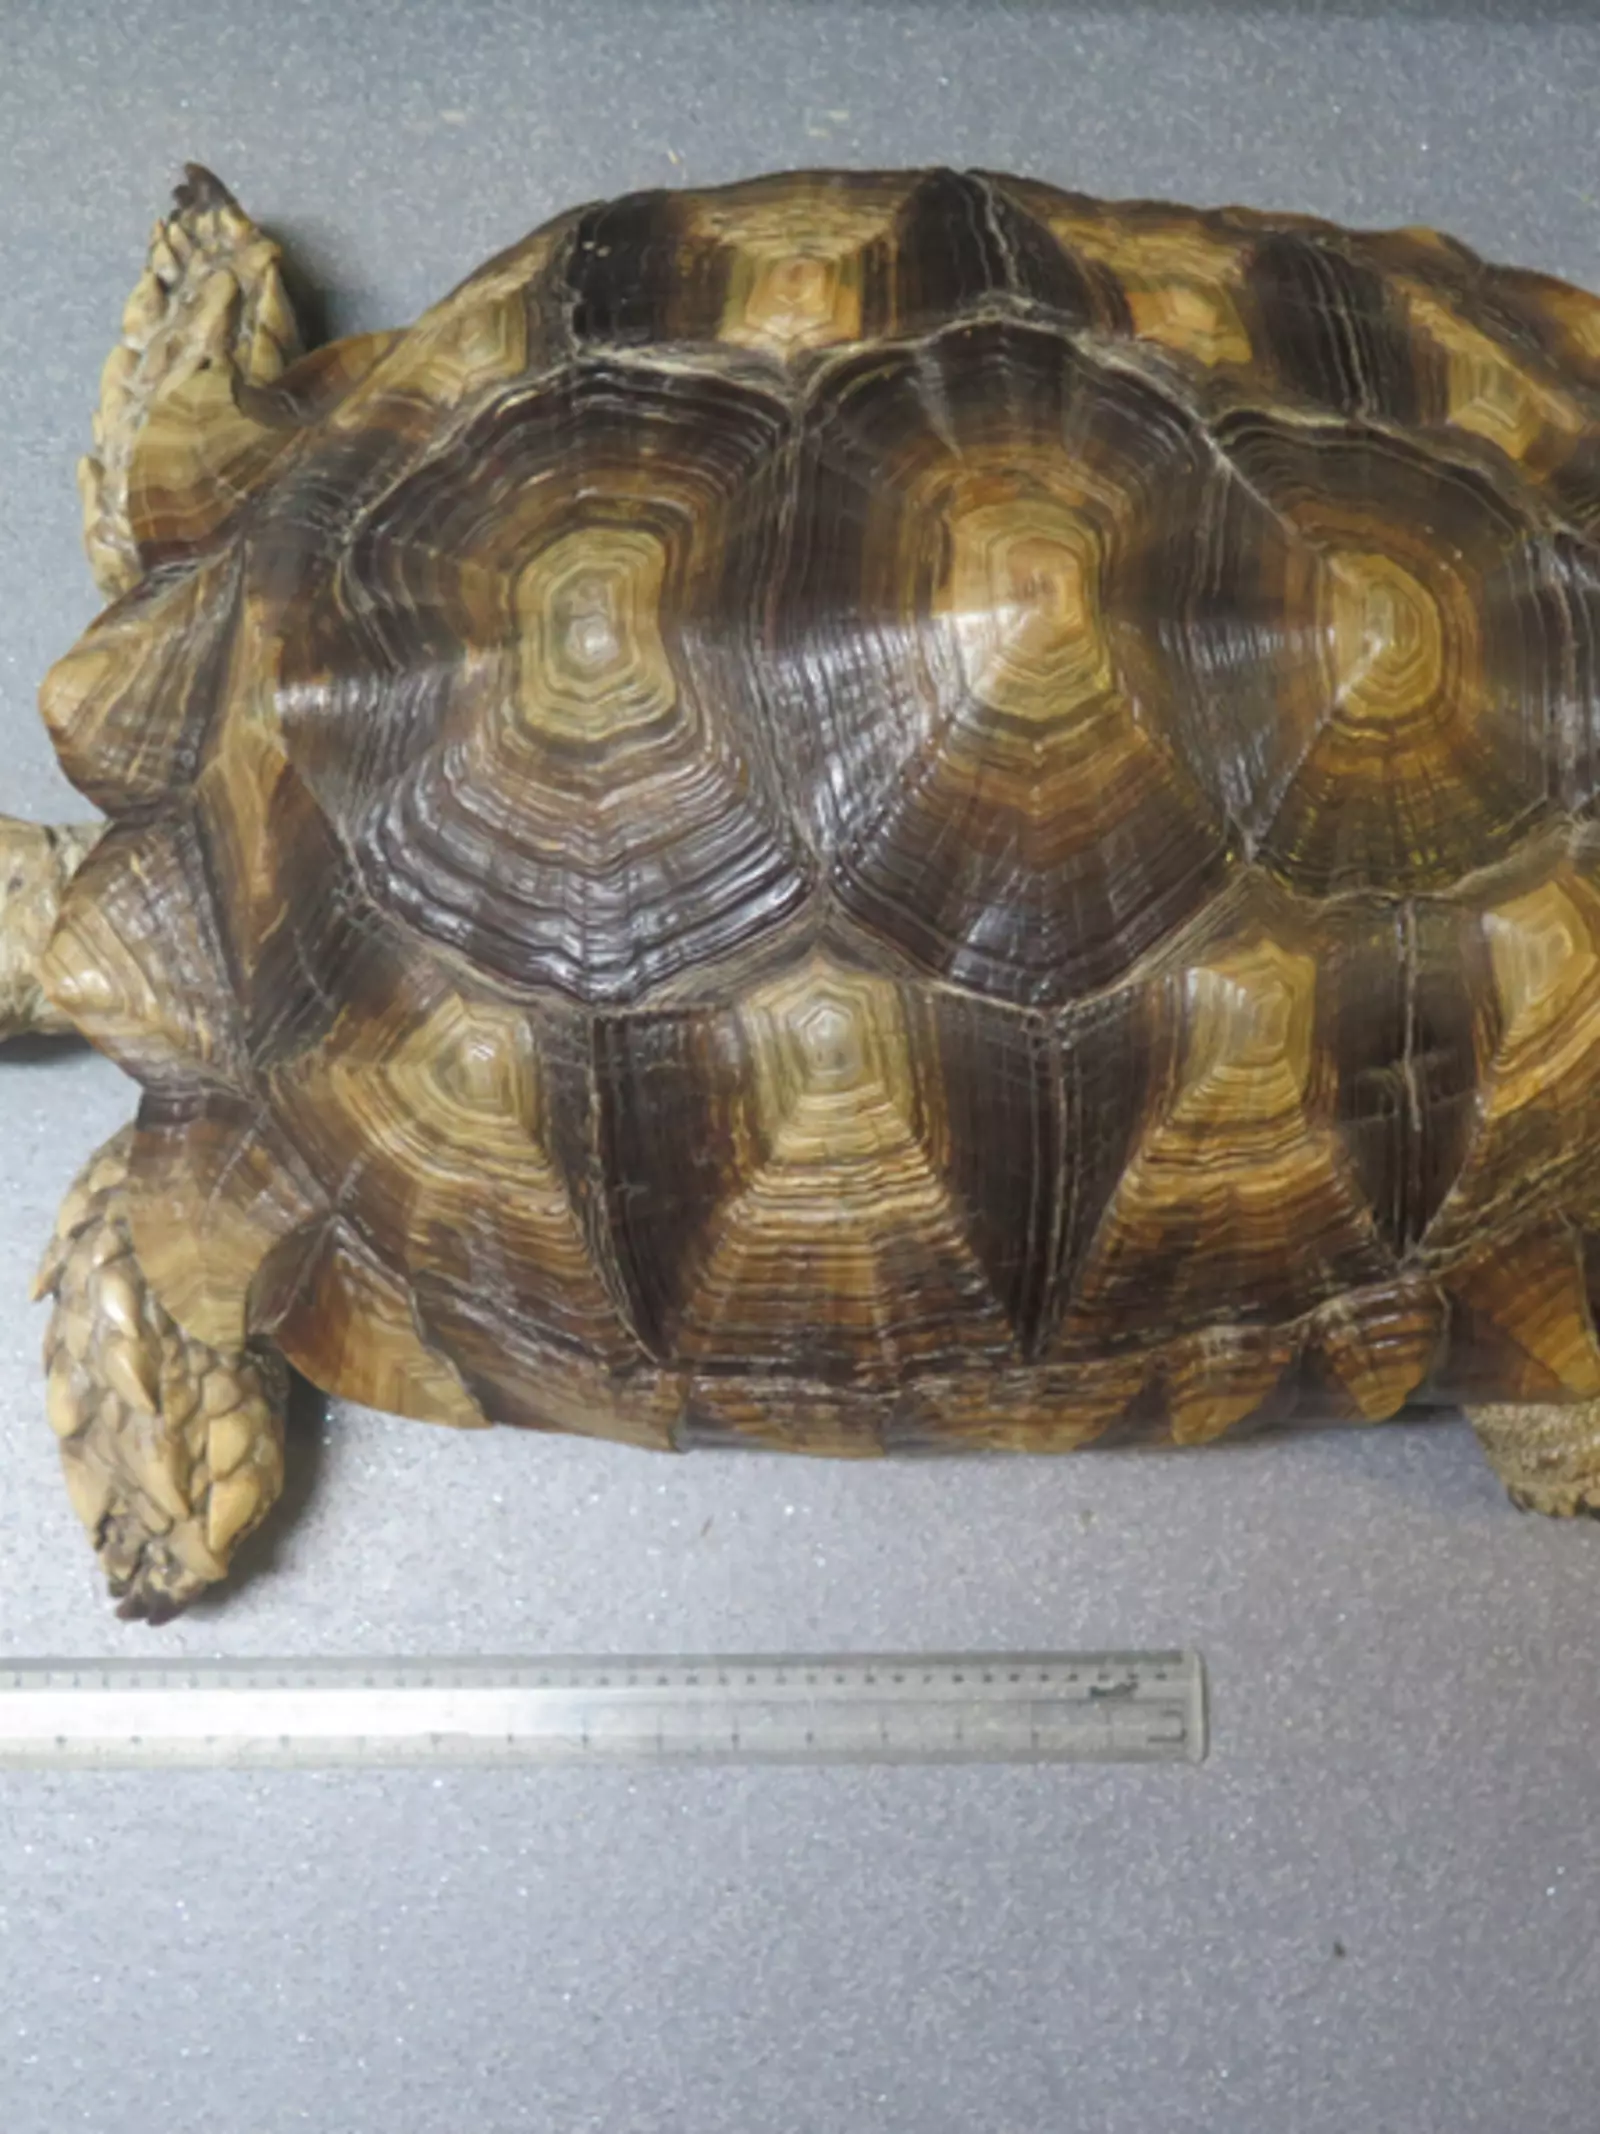 Spurred tortoise taxidermy 